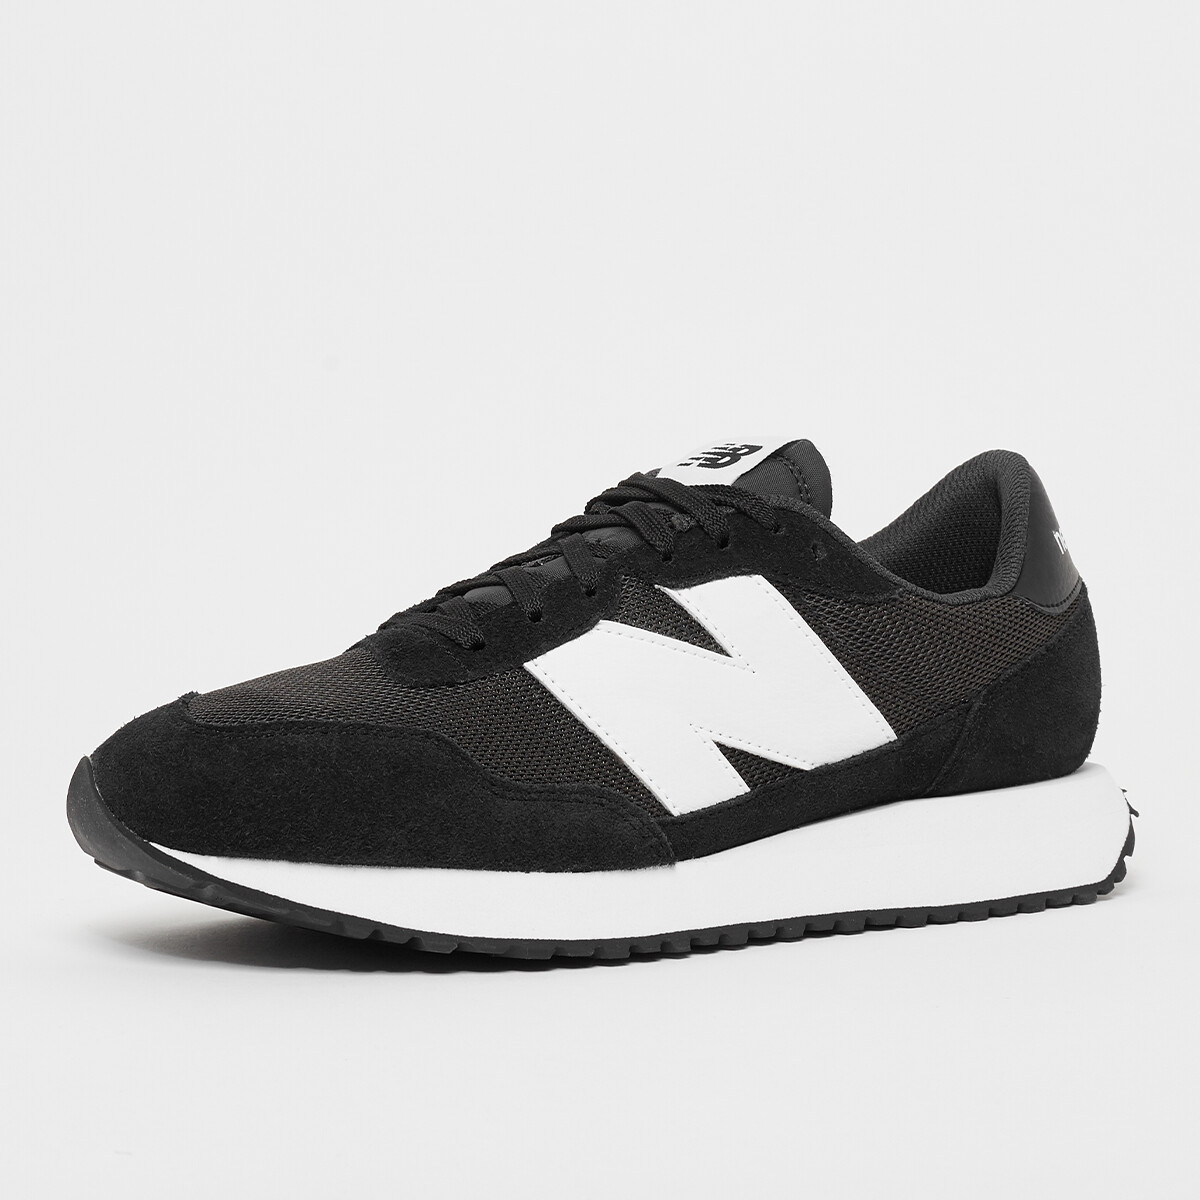 Buy New Balance 237 black magnet from £63.99 (Today) – Best Deals on ...